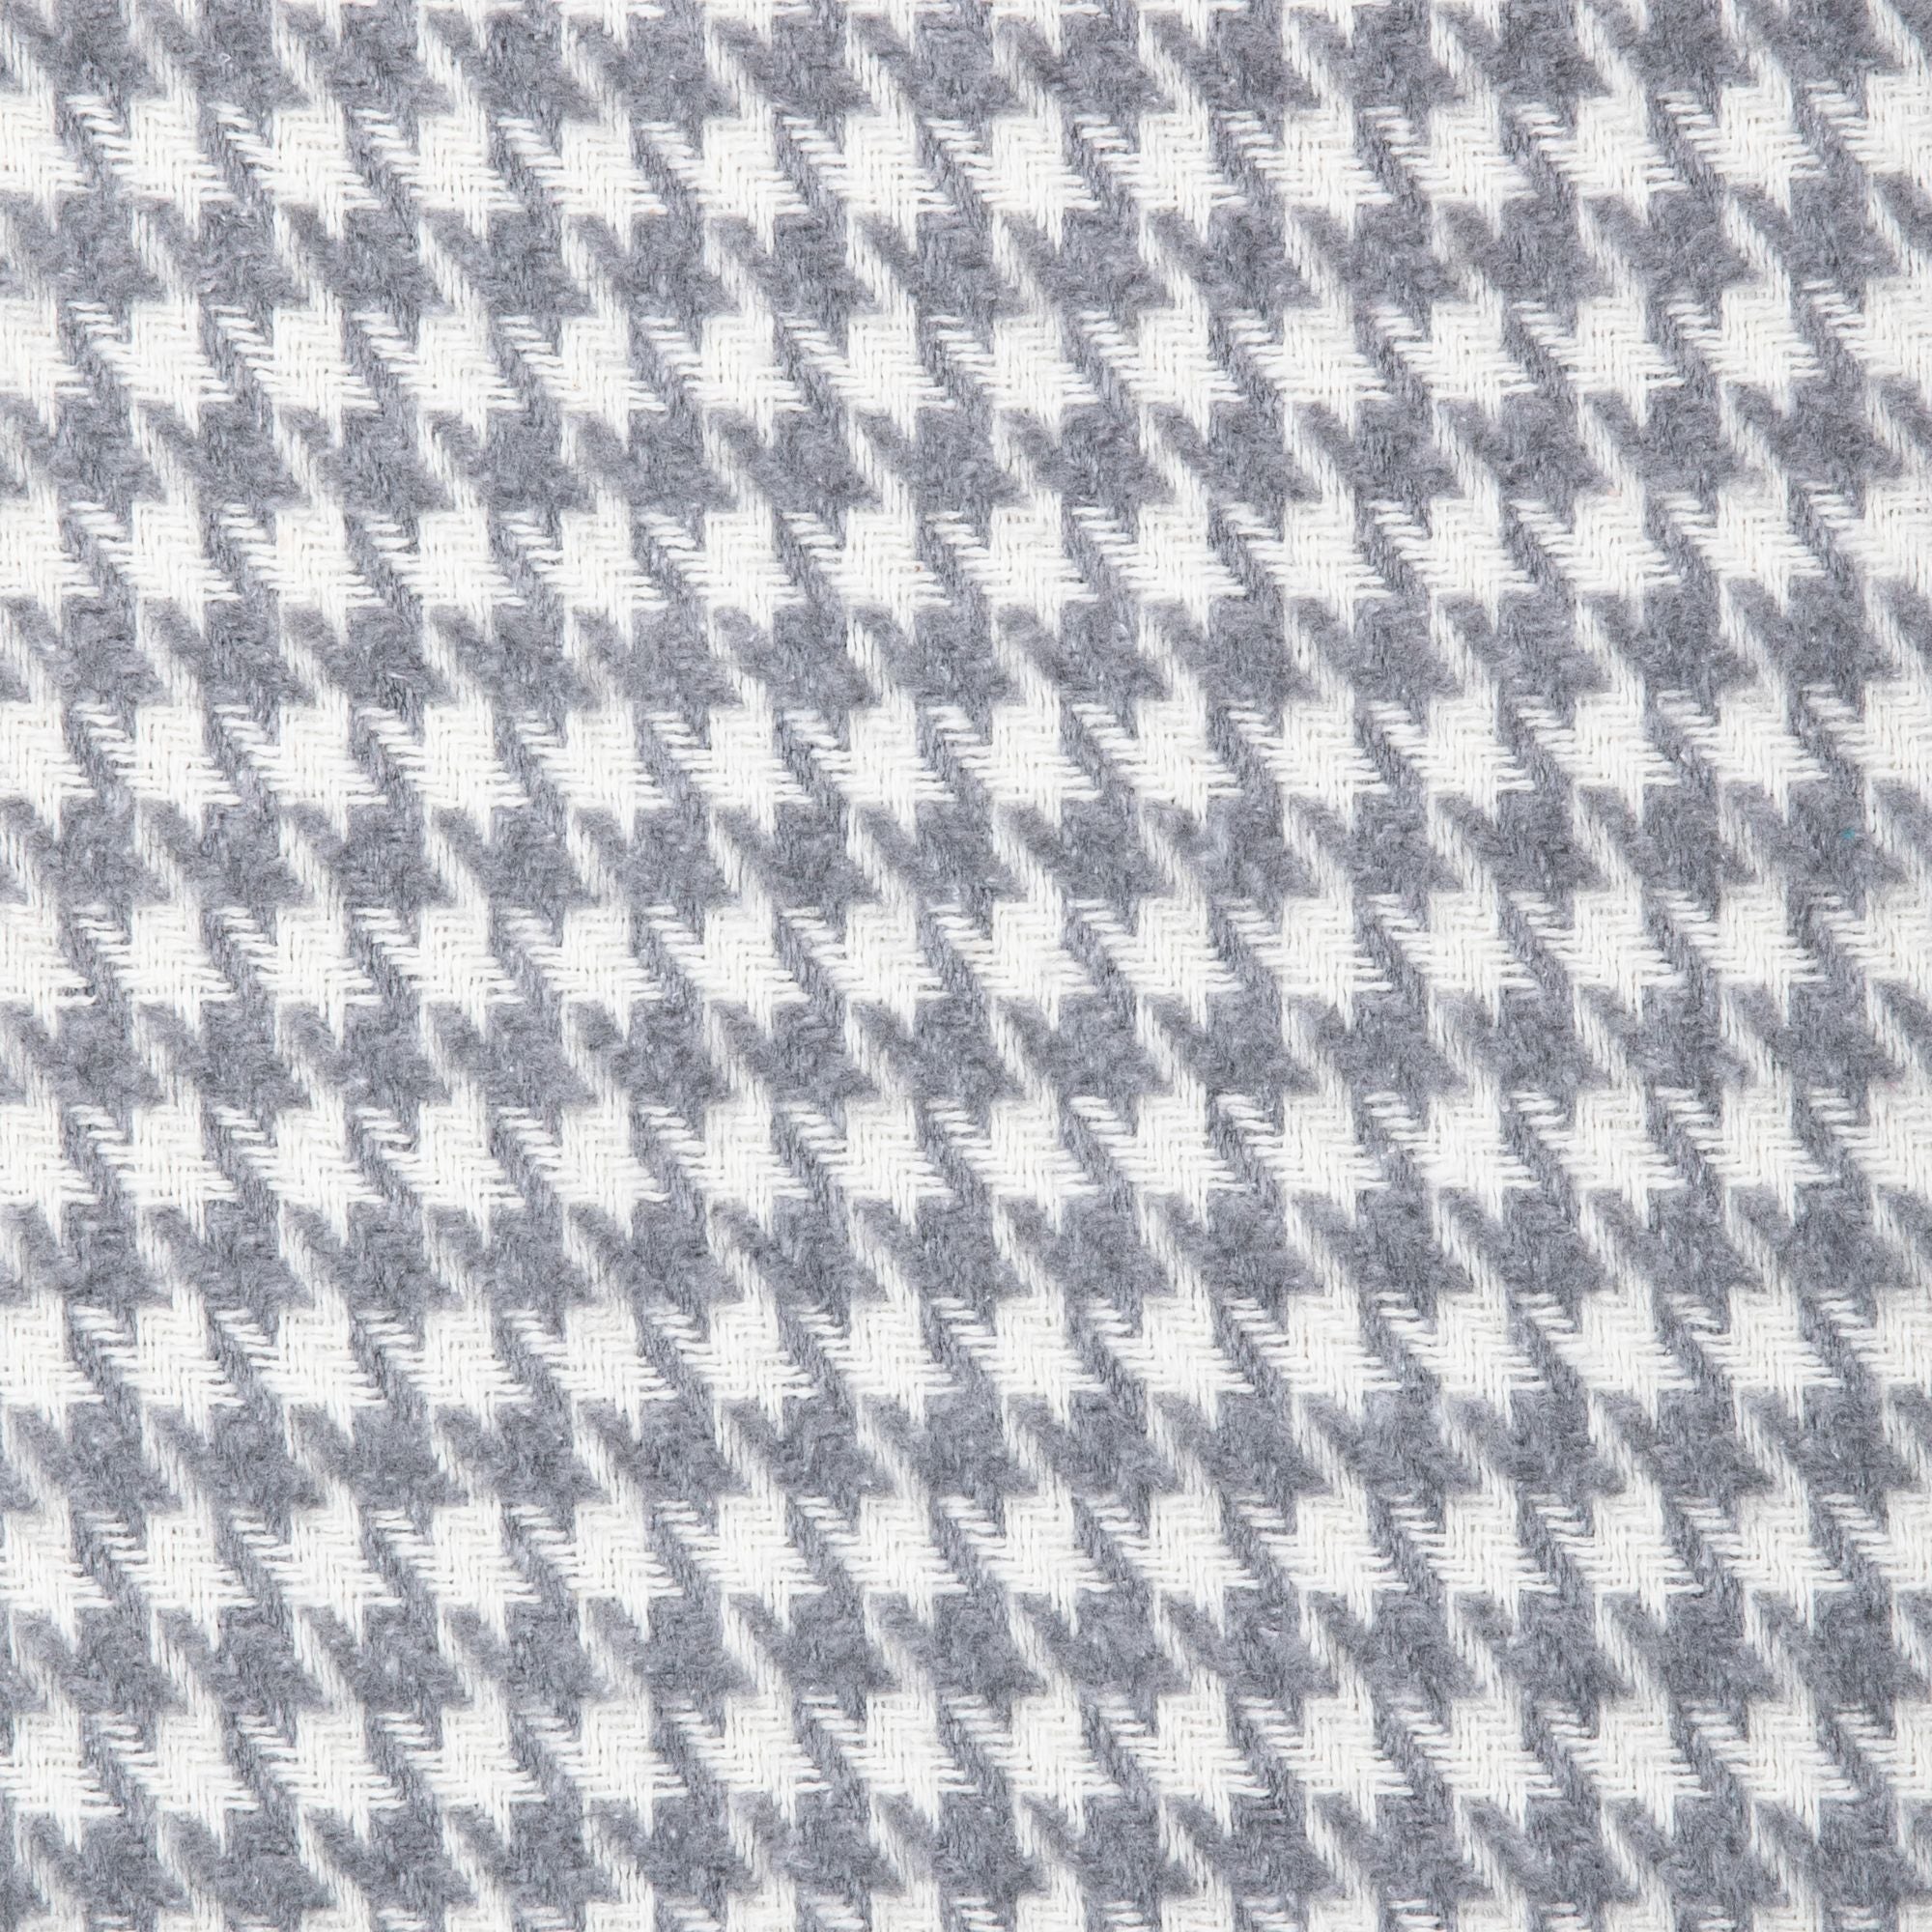 Trimita | Macro shot of the Grey Houndstooth Luxury Throw Blanket on a white background, showcasing the precision and traditional weaving techniques.